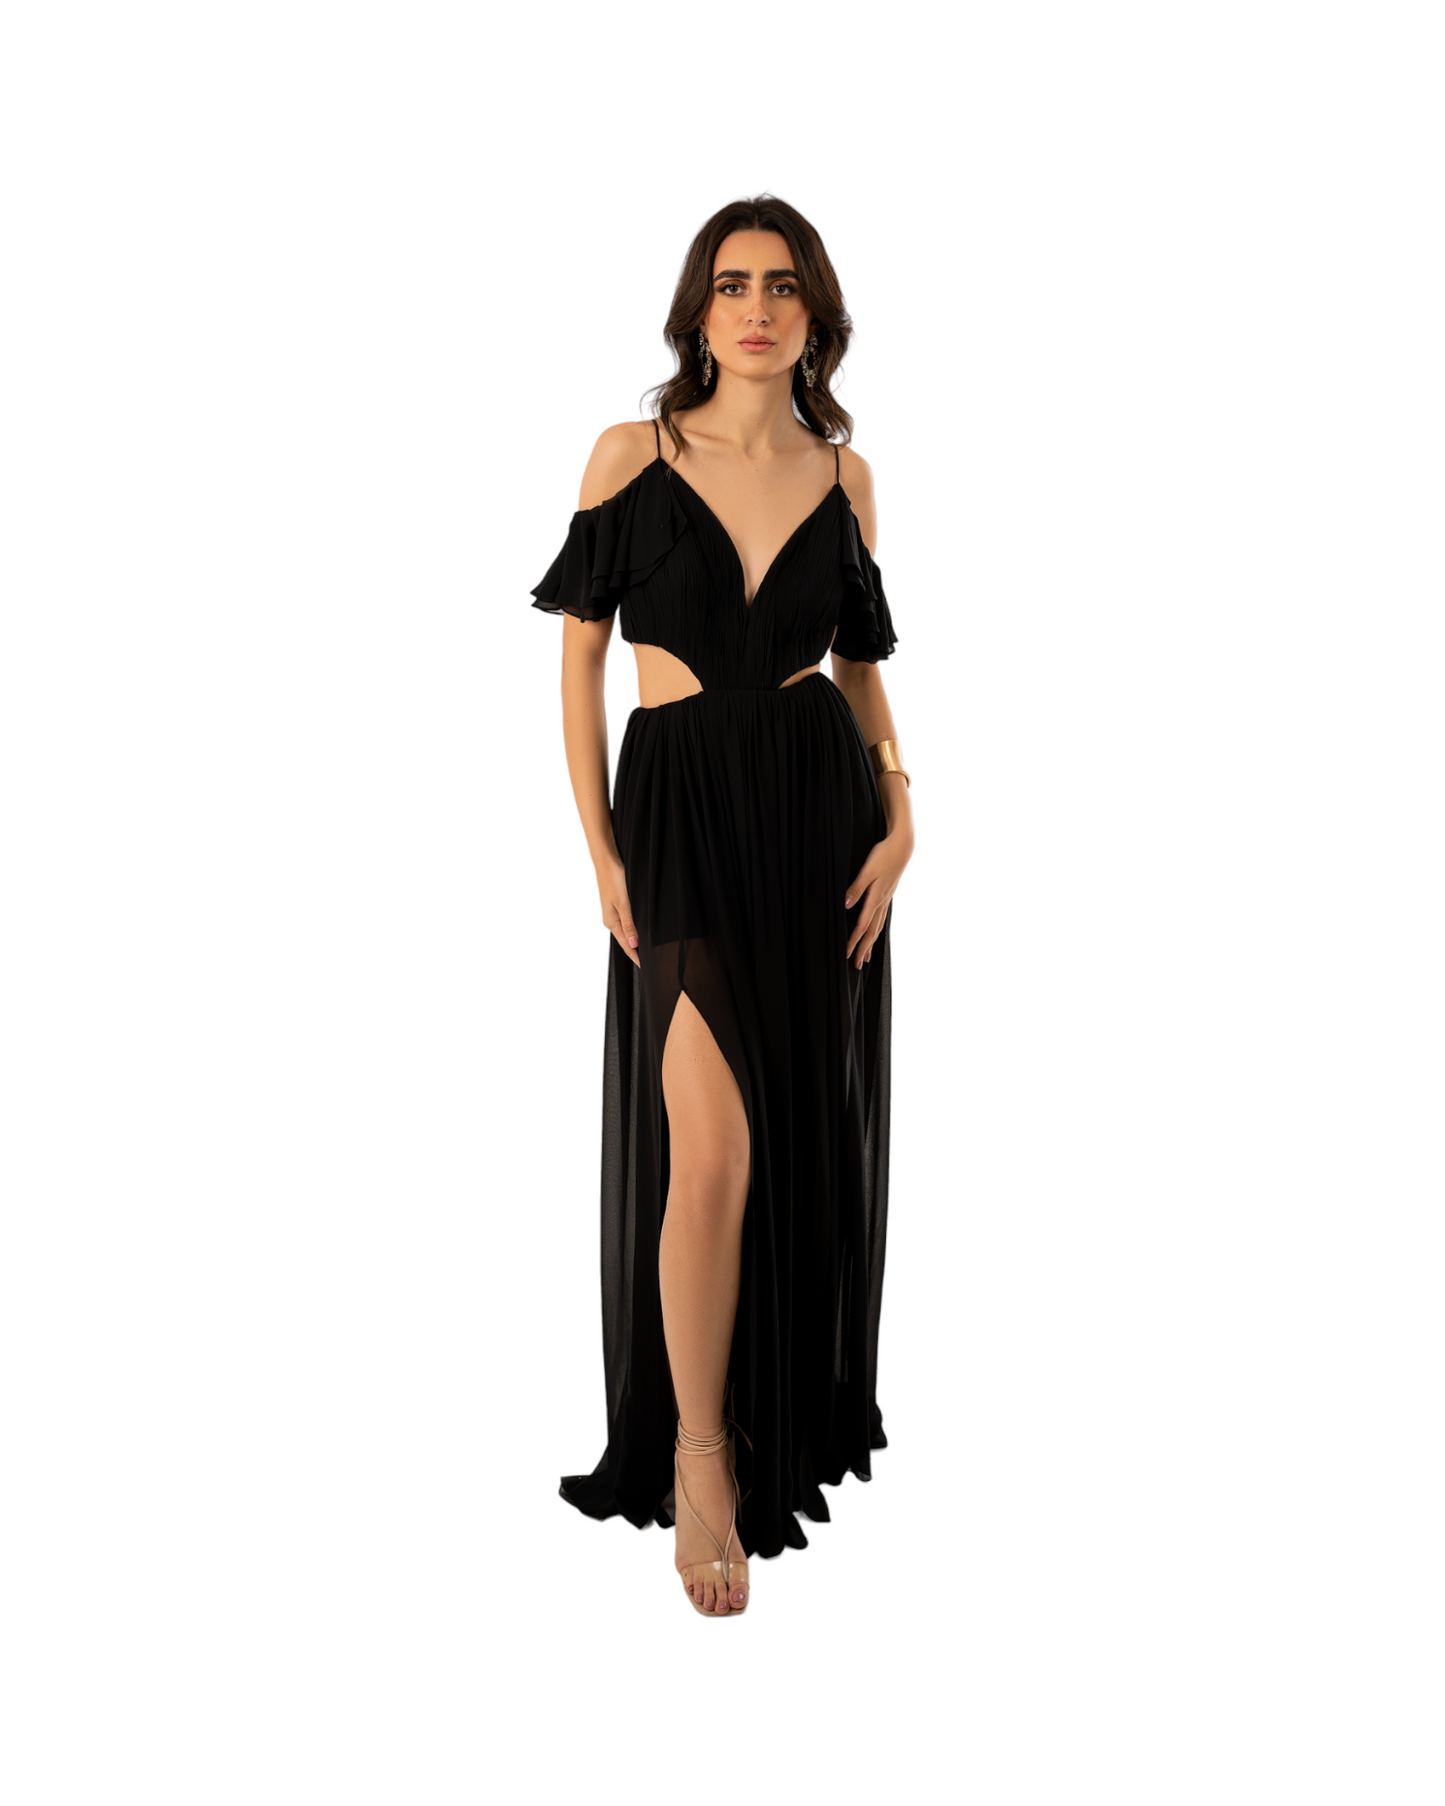 Fatale by Angie Melissae Black Dress